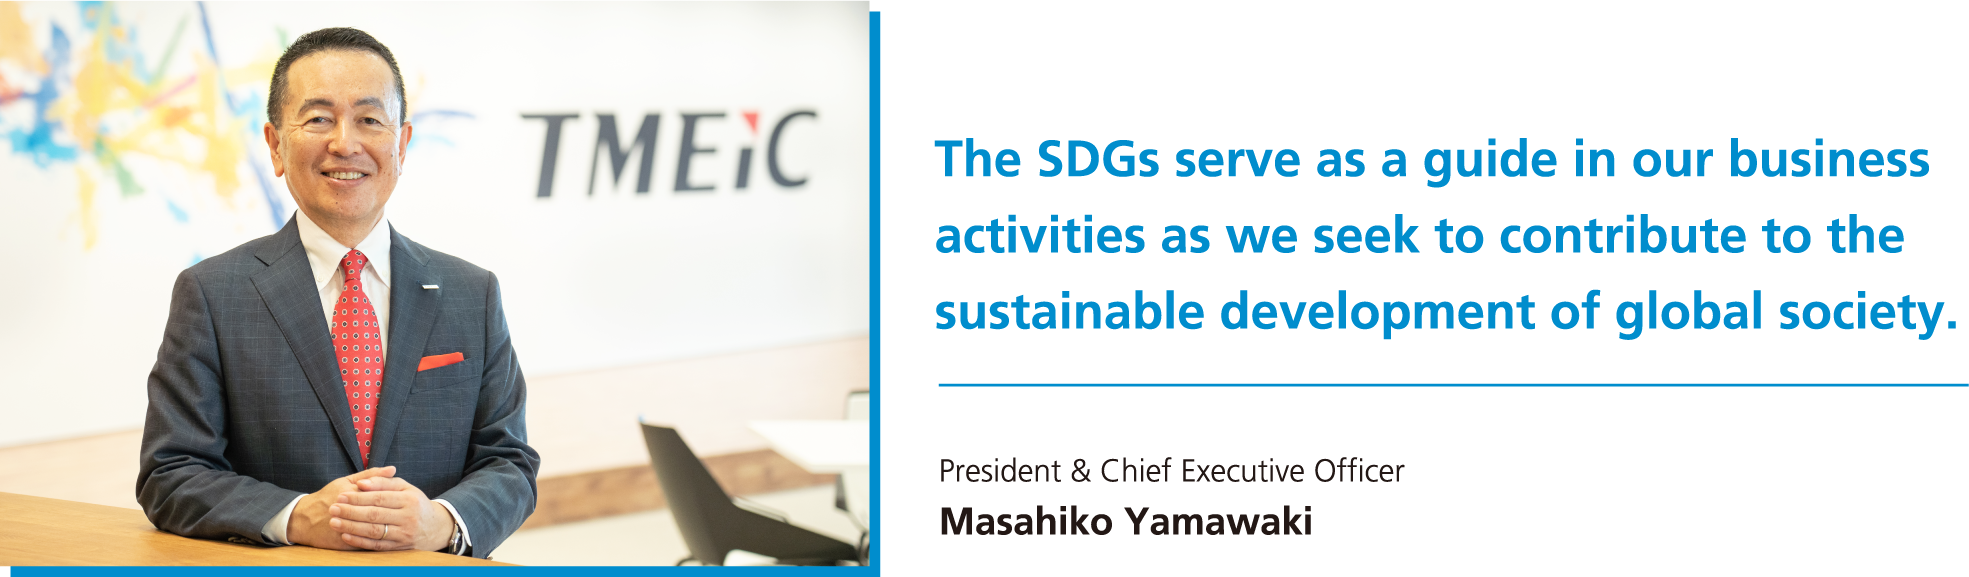 The SDGs serve as a guide in our business activities as we seek to contribute to the sustainable development of global society.